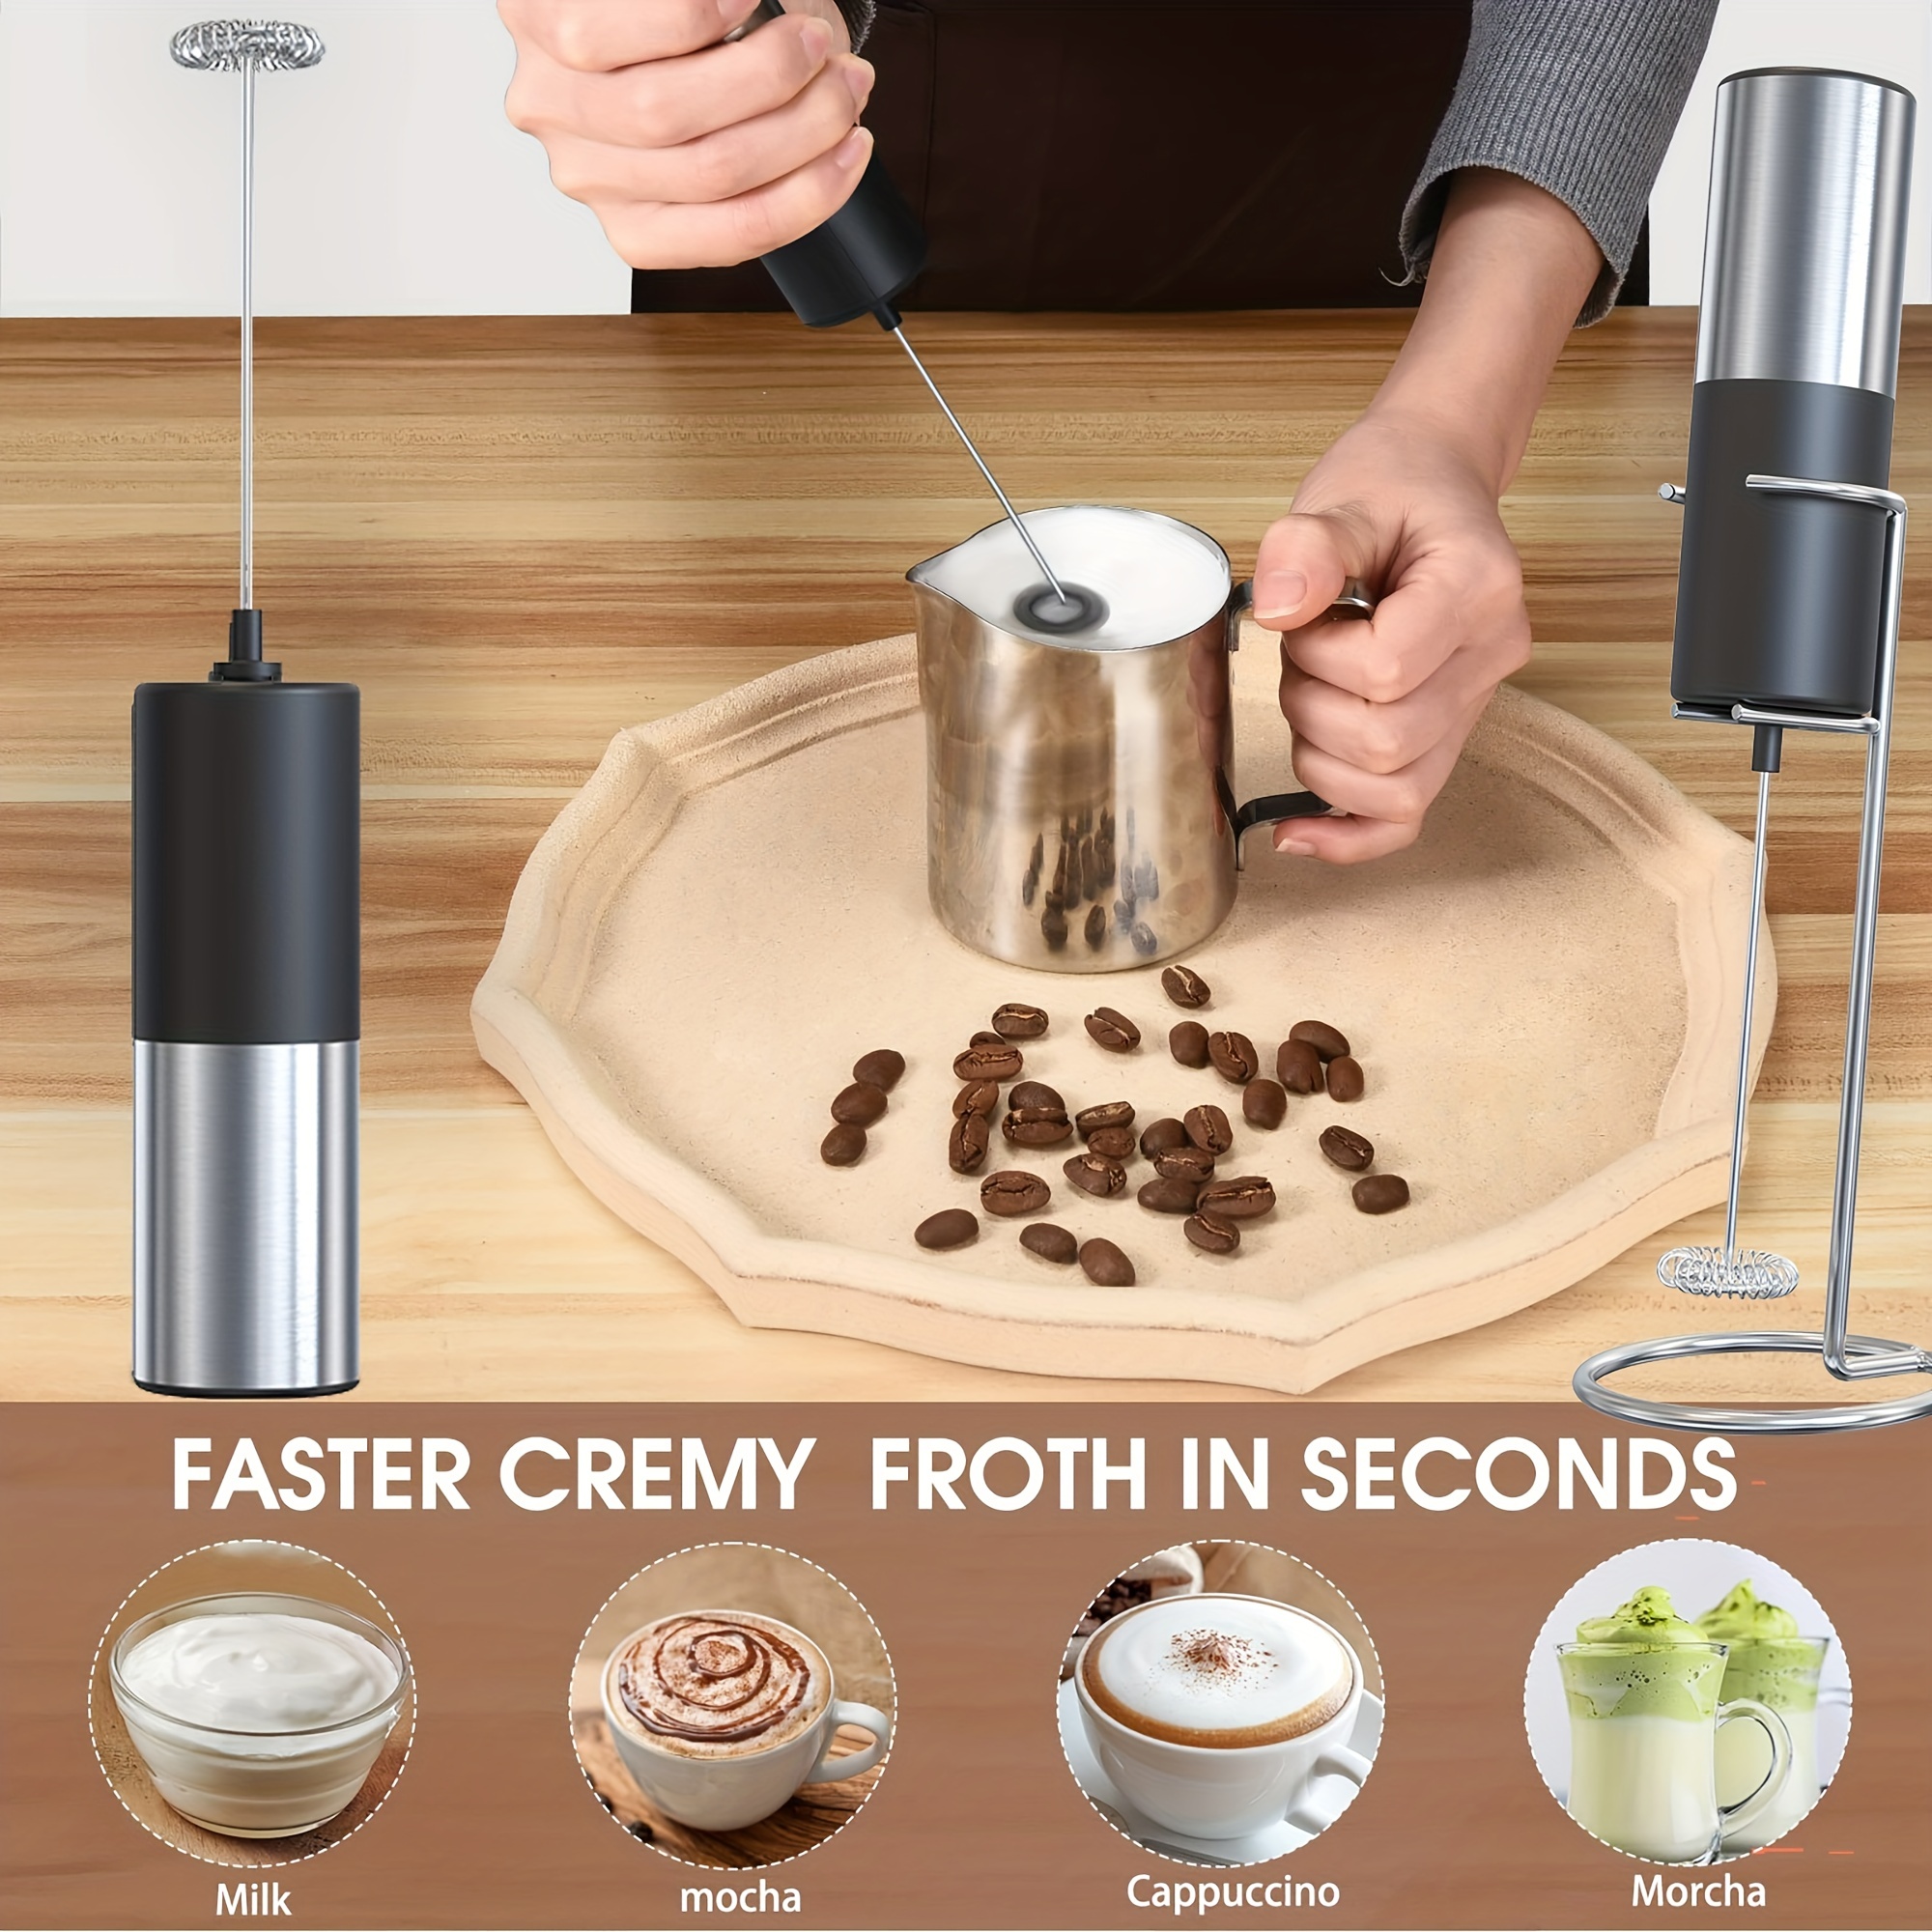 Kaffe Handheld Milk Frother w/ Stand, Stainless Steel Battery